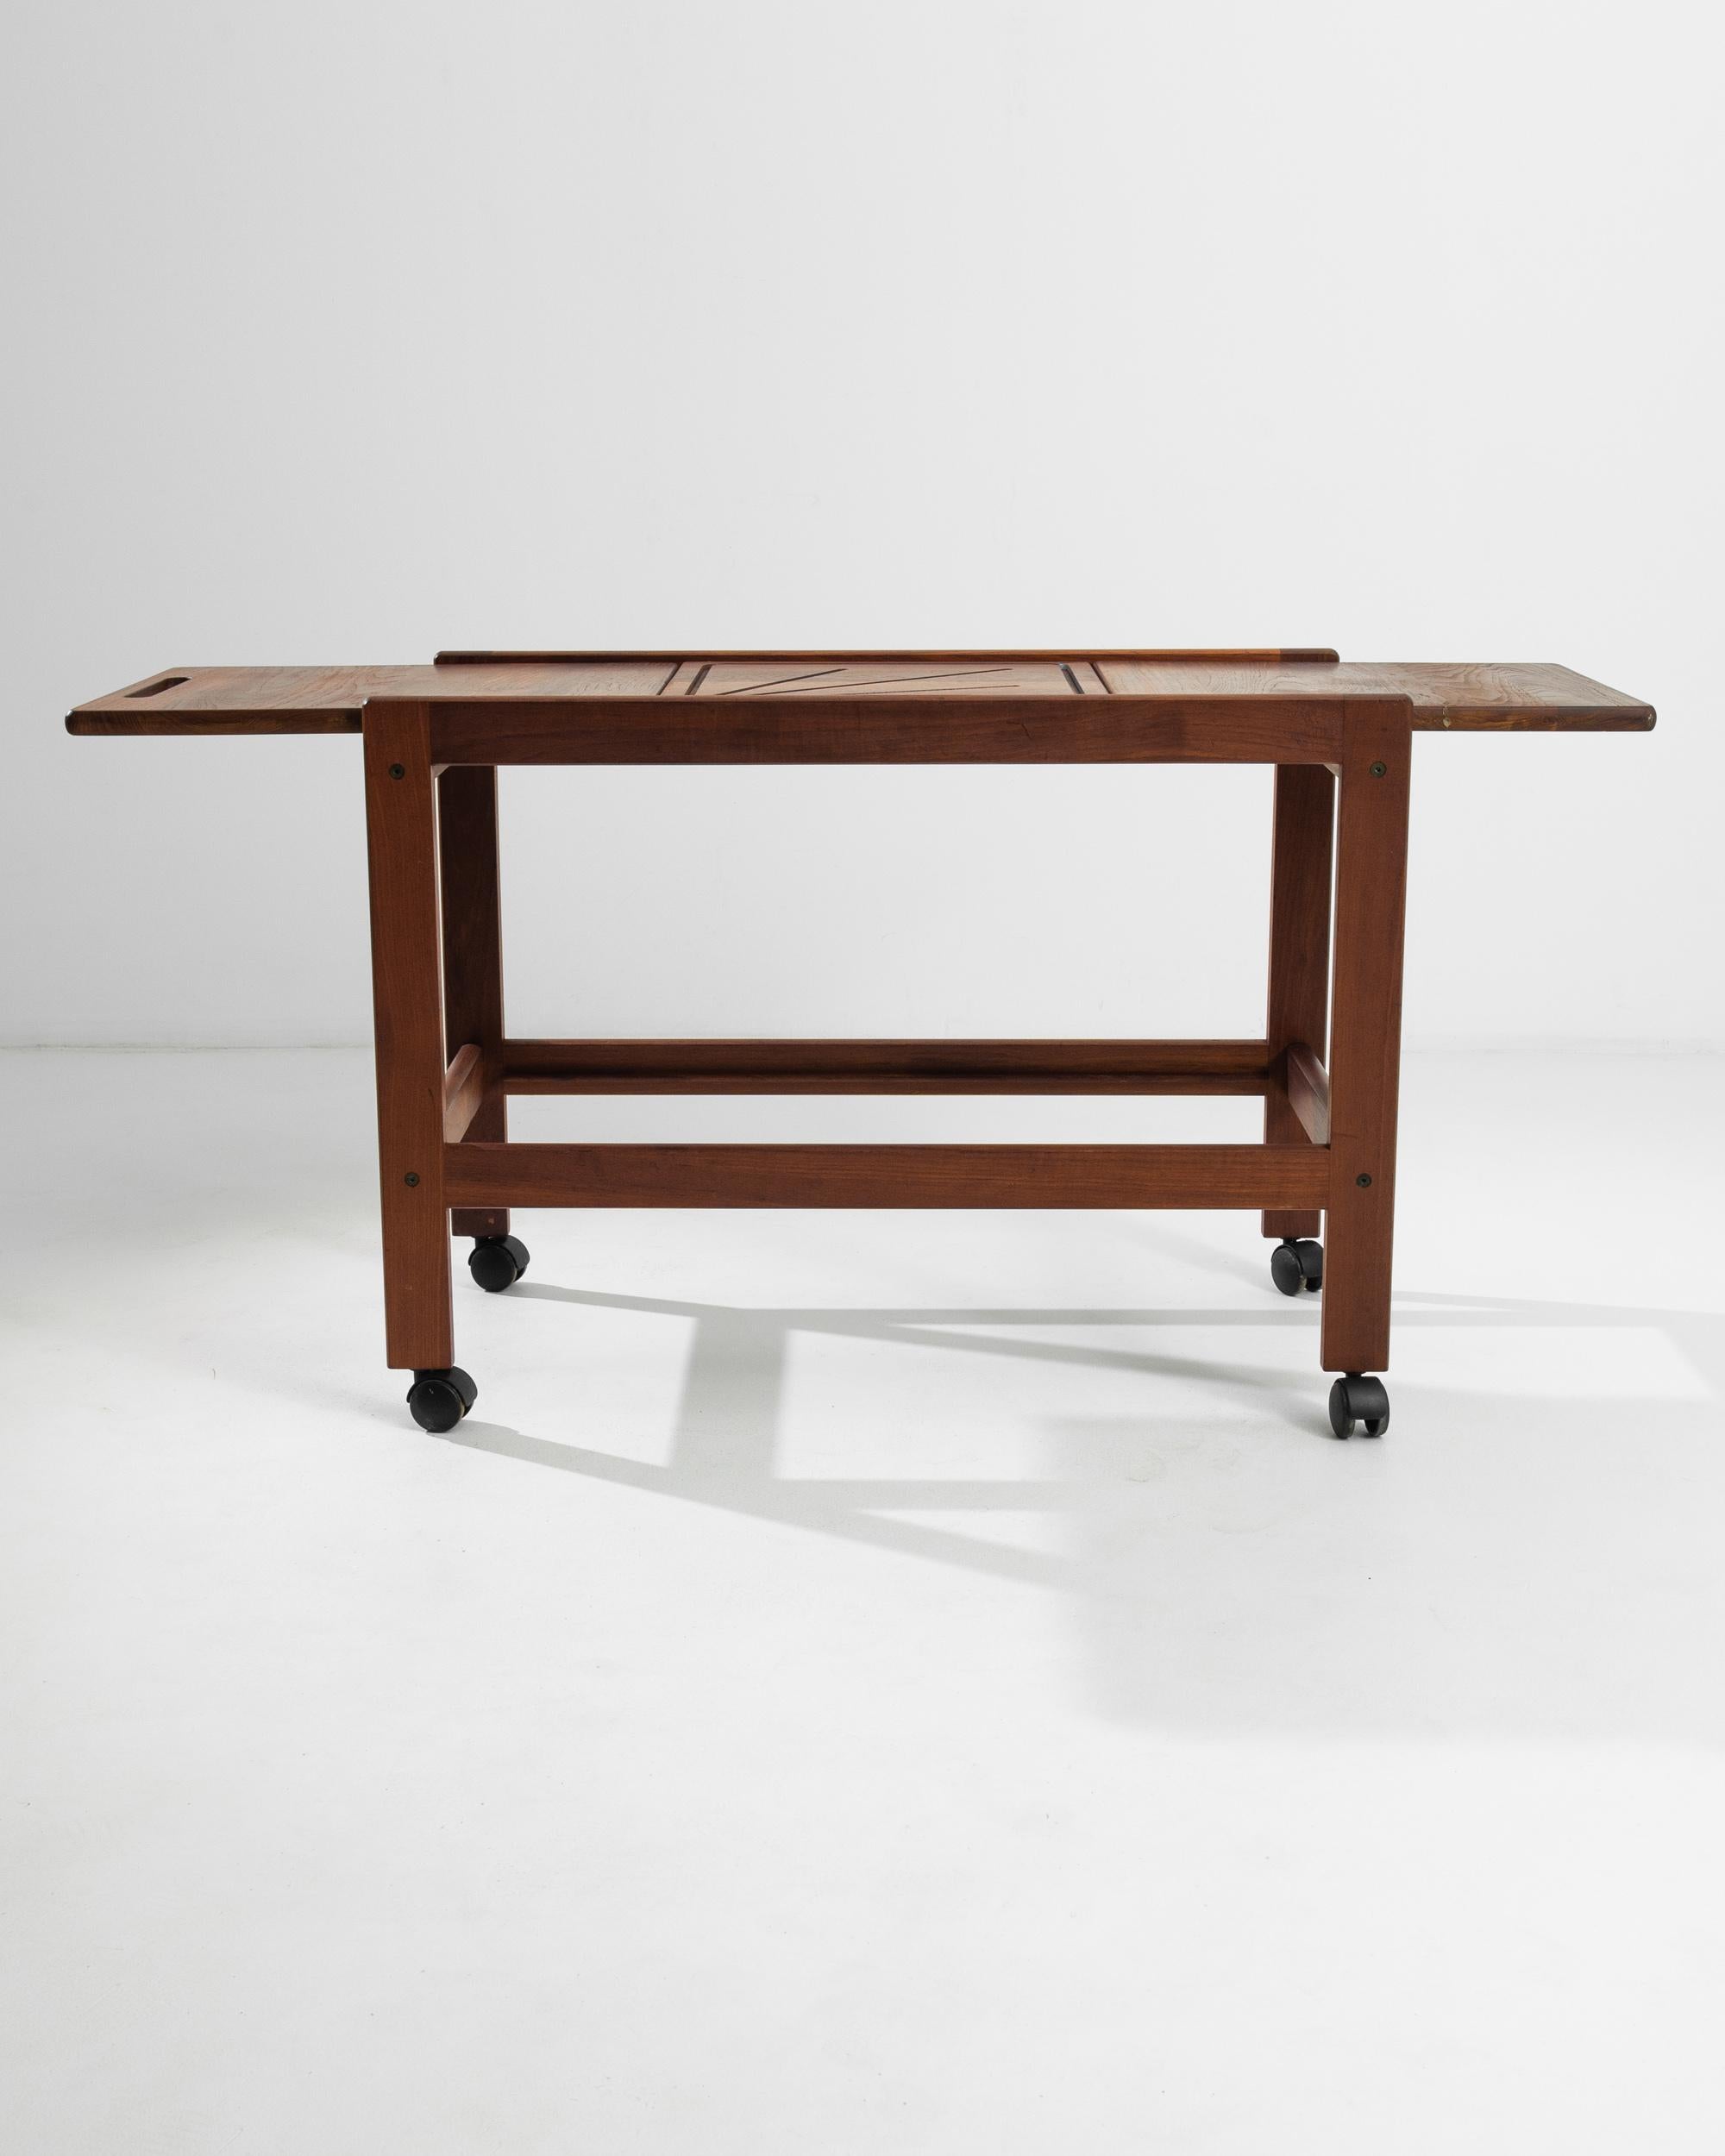 Laying a full focus on minimalism and functionality, this Danish teak cart features a simple two-tier structure resting on caster wheels. Rearrangeable trays give a variety of configurations. The smooth corners and rich finish animate the masterful